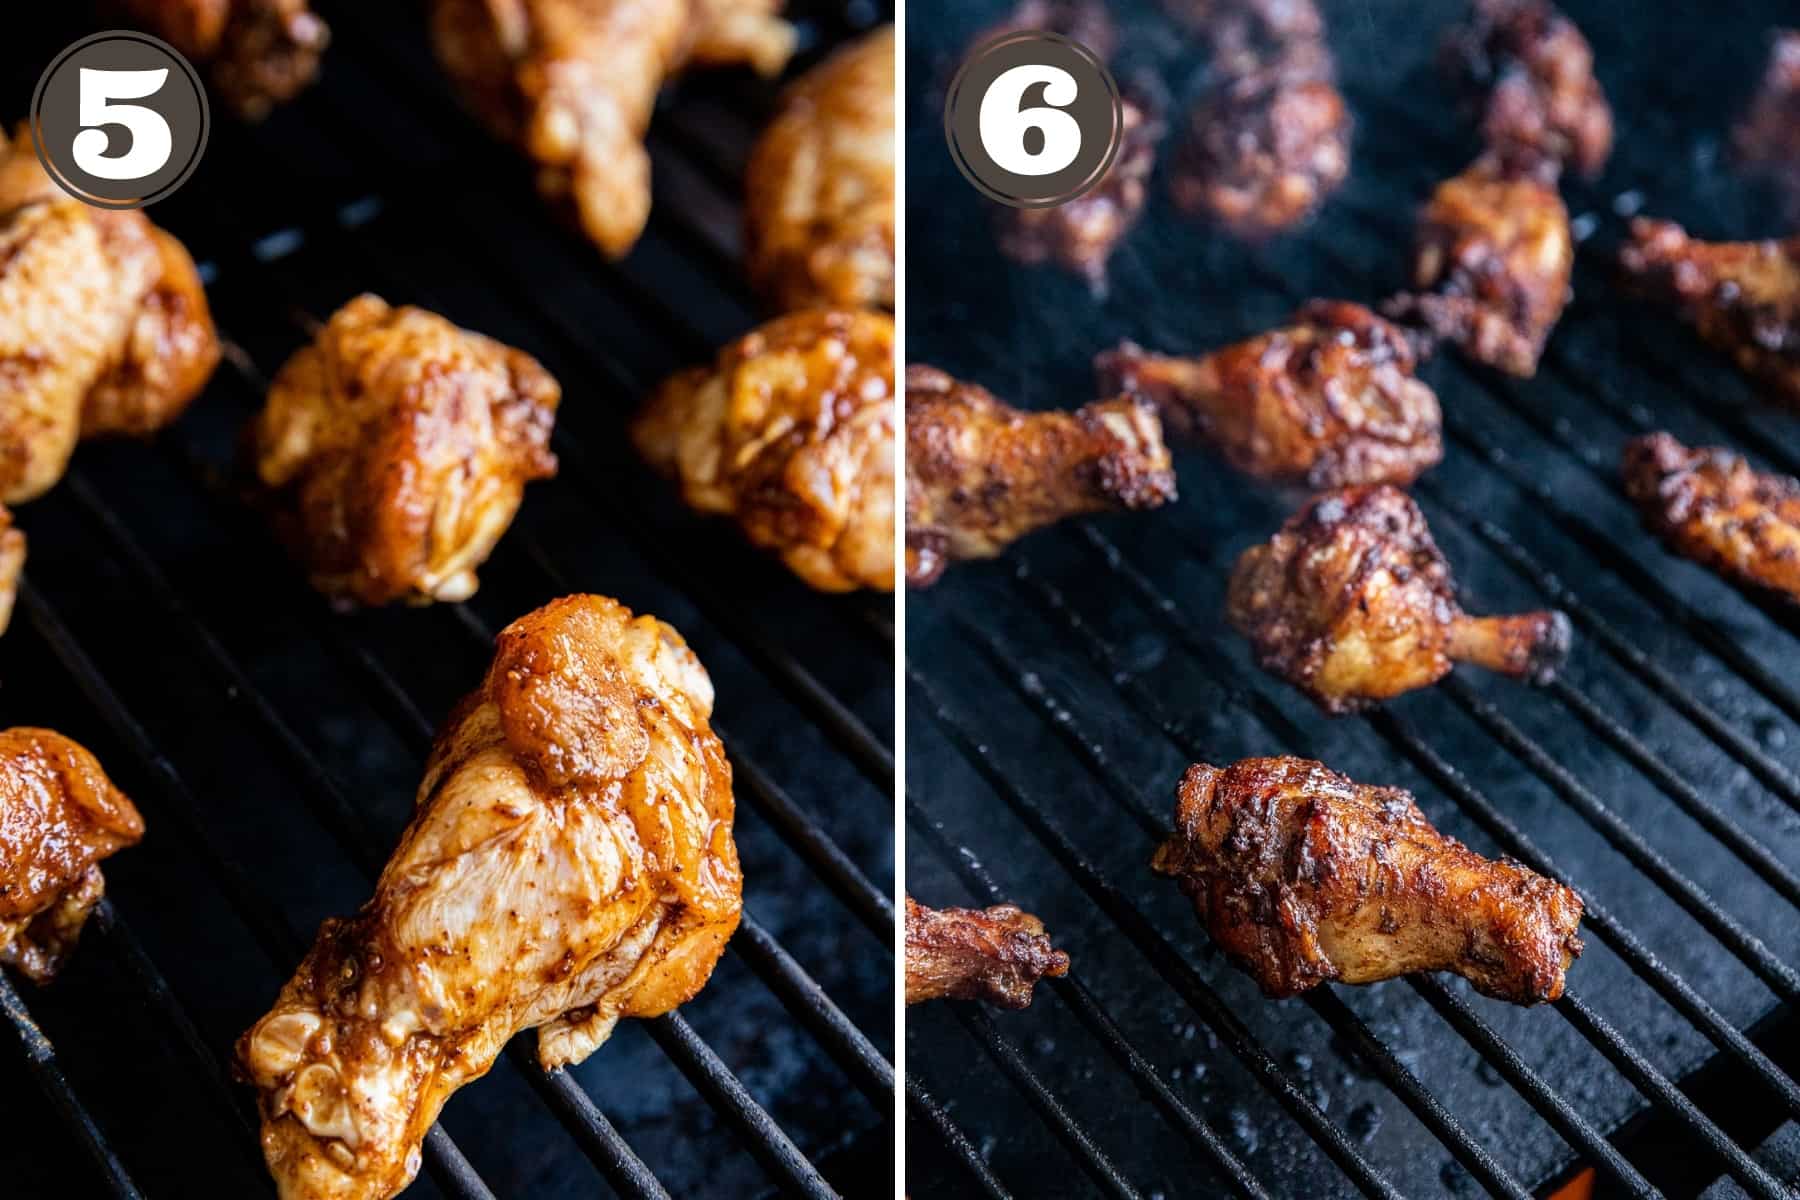 Side by side photos of chicken wings being places on the smoker and the chicken wings fully grilled on the smoker.